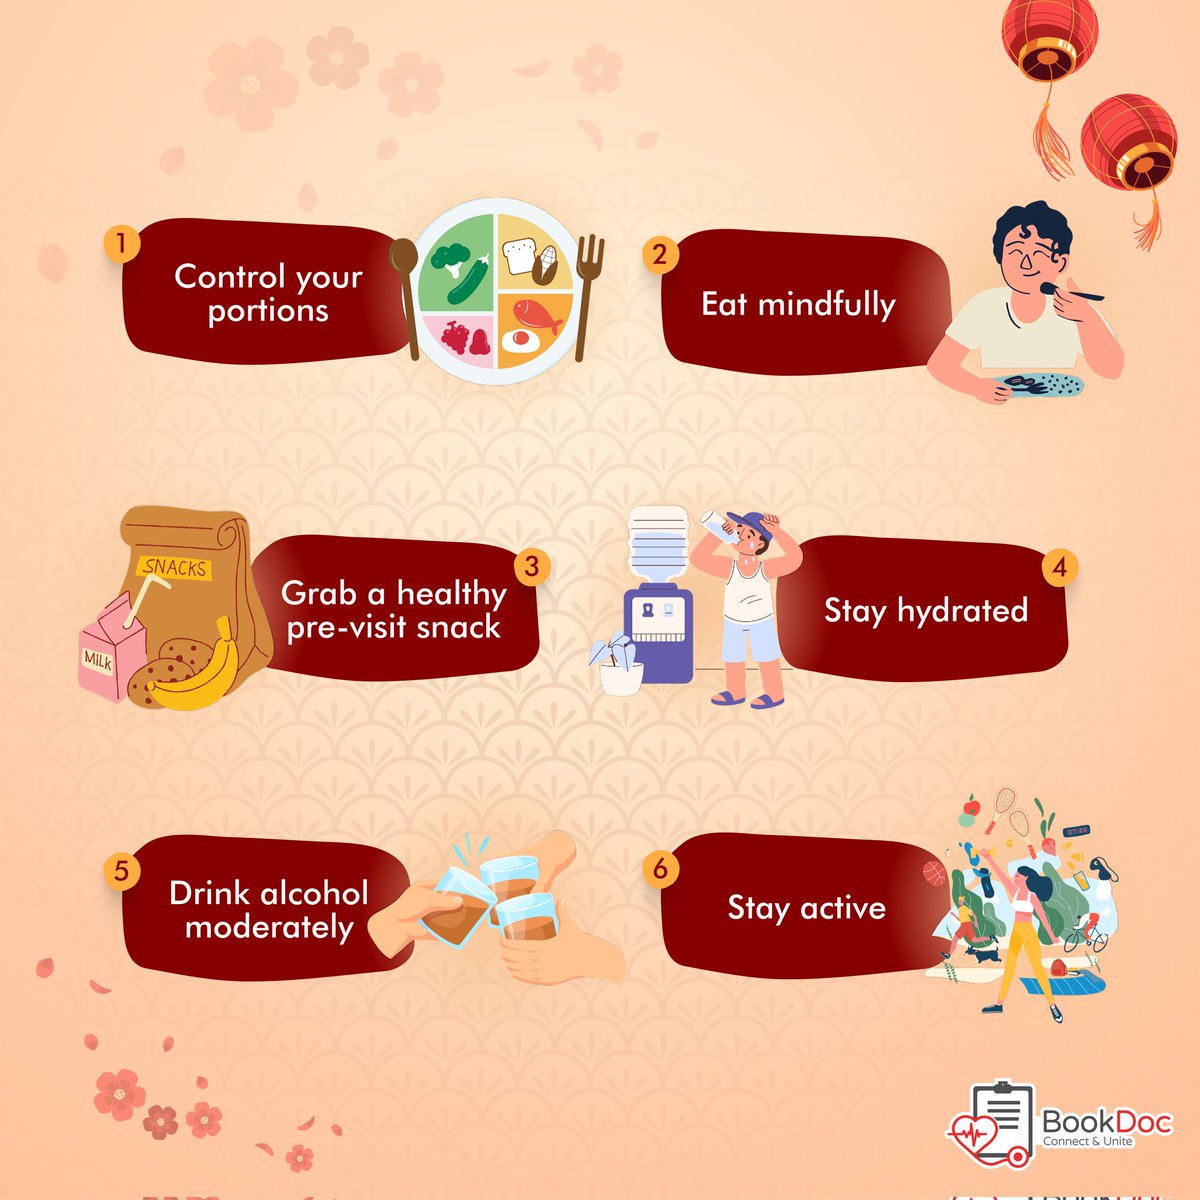 Elevate your Chinese New Year celebrations with a touch of wellness! ✨ Discover tips and tricks for a festive season full of joy and well-being. Gong Xi Fa Cai! 🎉 #healthiercny #mindfulcelebration